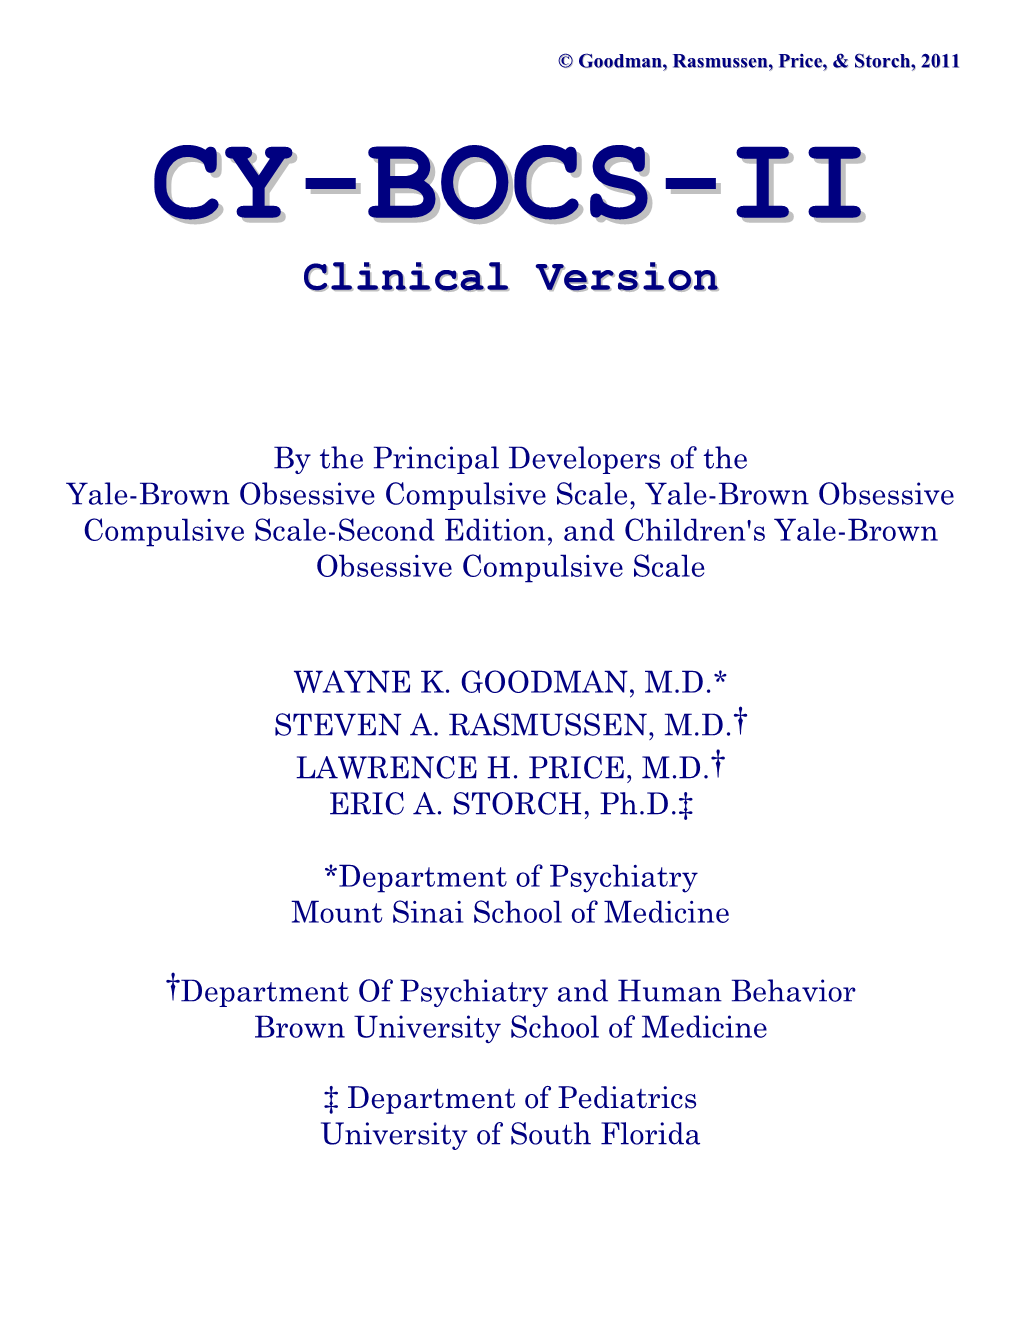 Y-BOCS Has Become the Gold Standard for Rating Symptom Severity in Patients with Obsessive-Compulsive Disorder (OCD)